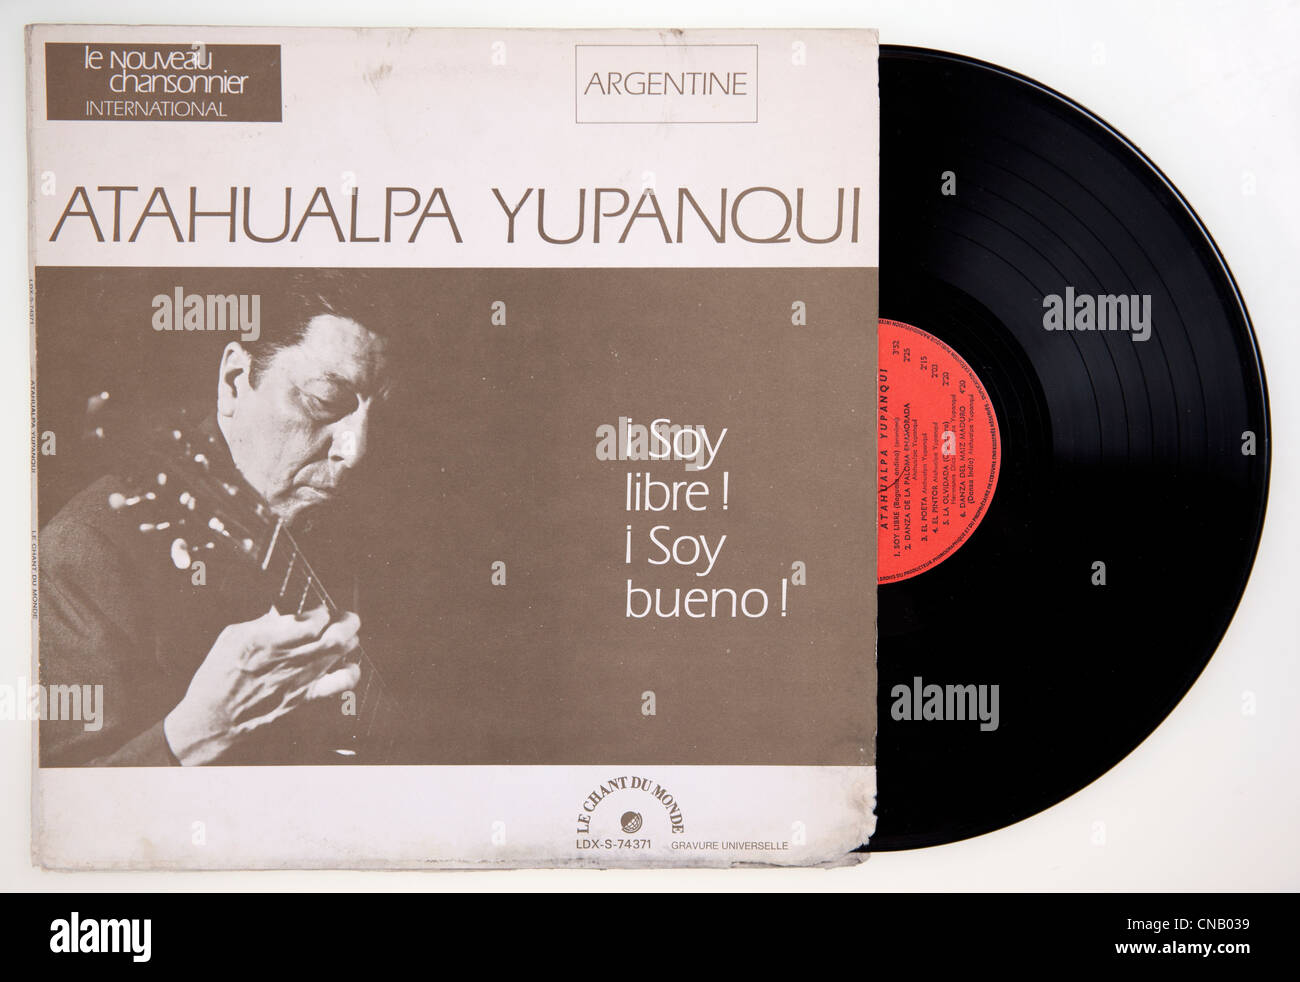 Cover of vinyl album Soy Libre! Soy Bueno! by Atahualpa Yupanqui, released 1968 on Le Chant du Monde record label Stock Photo